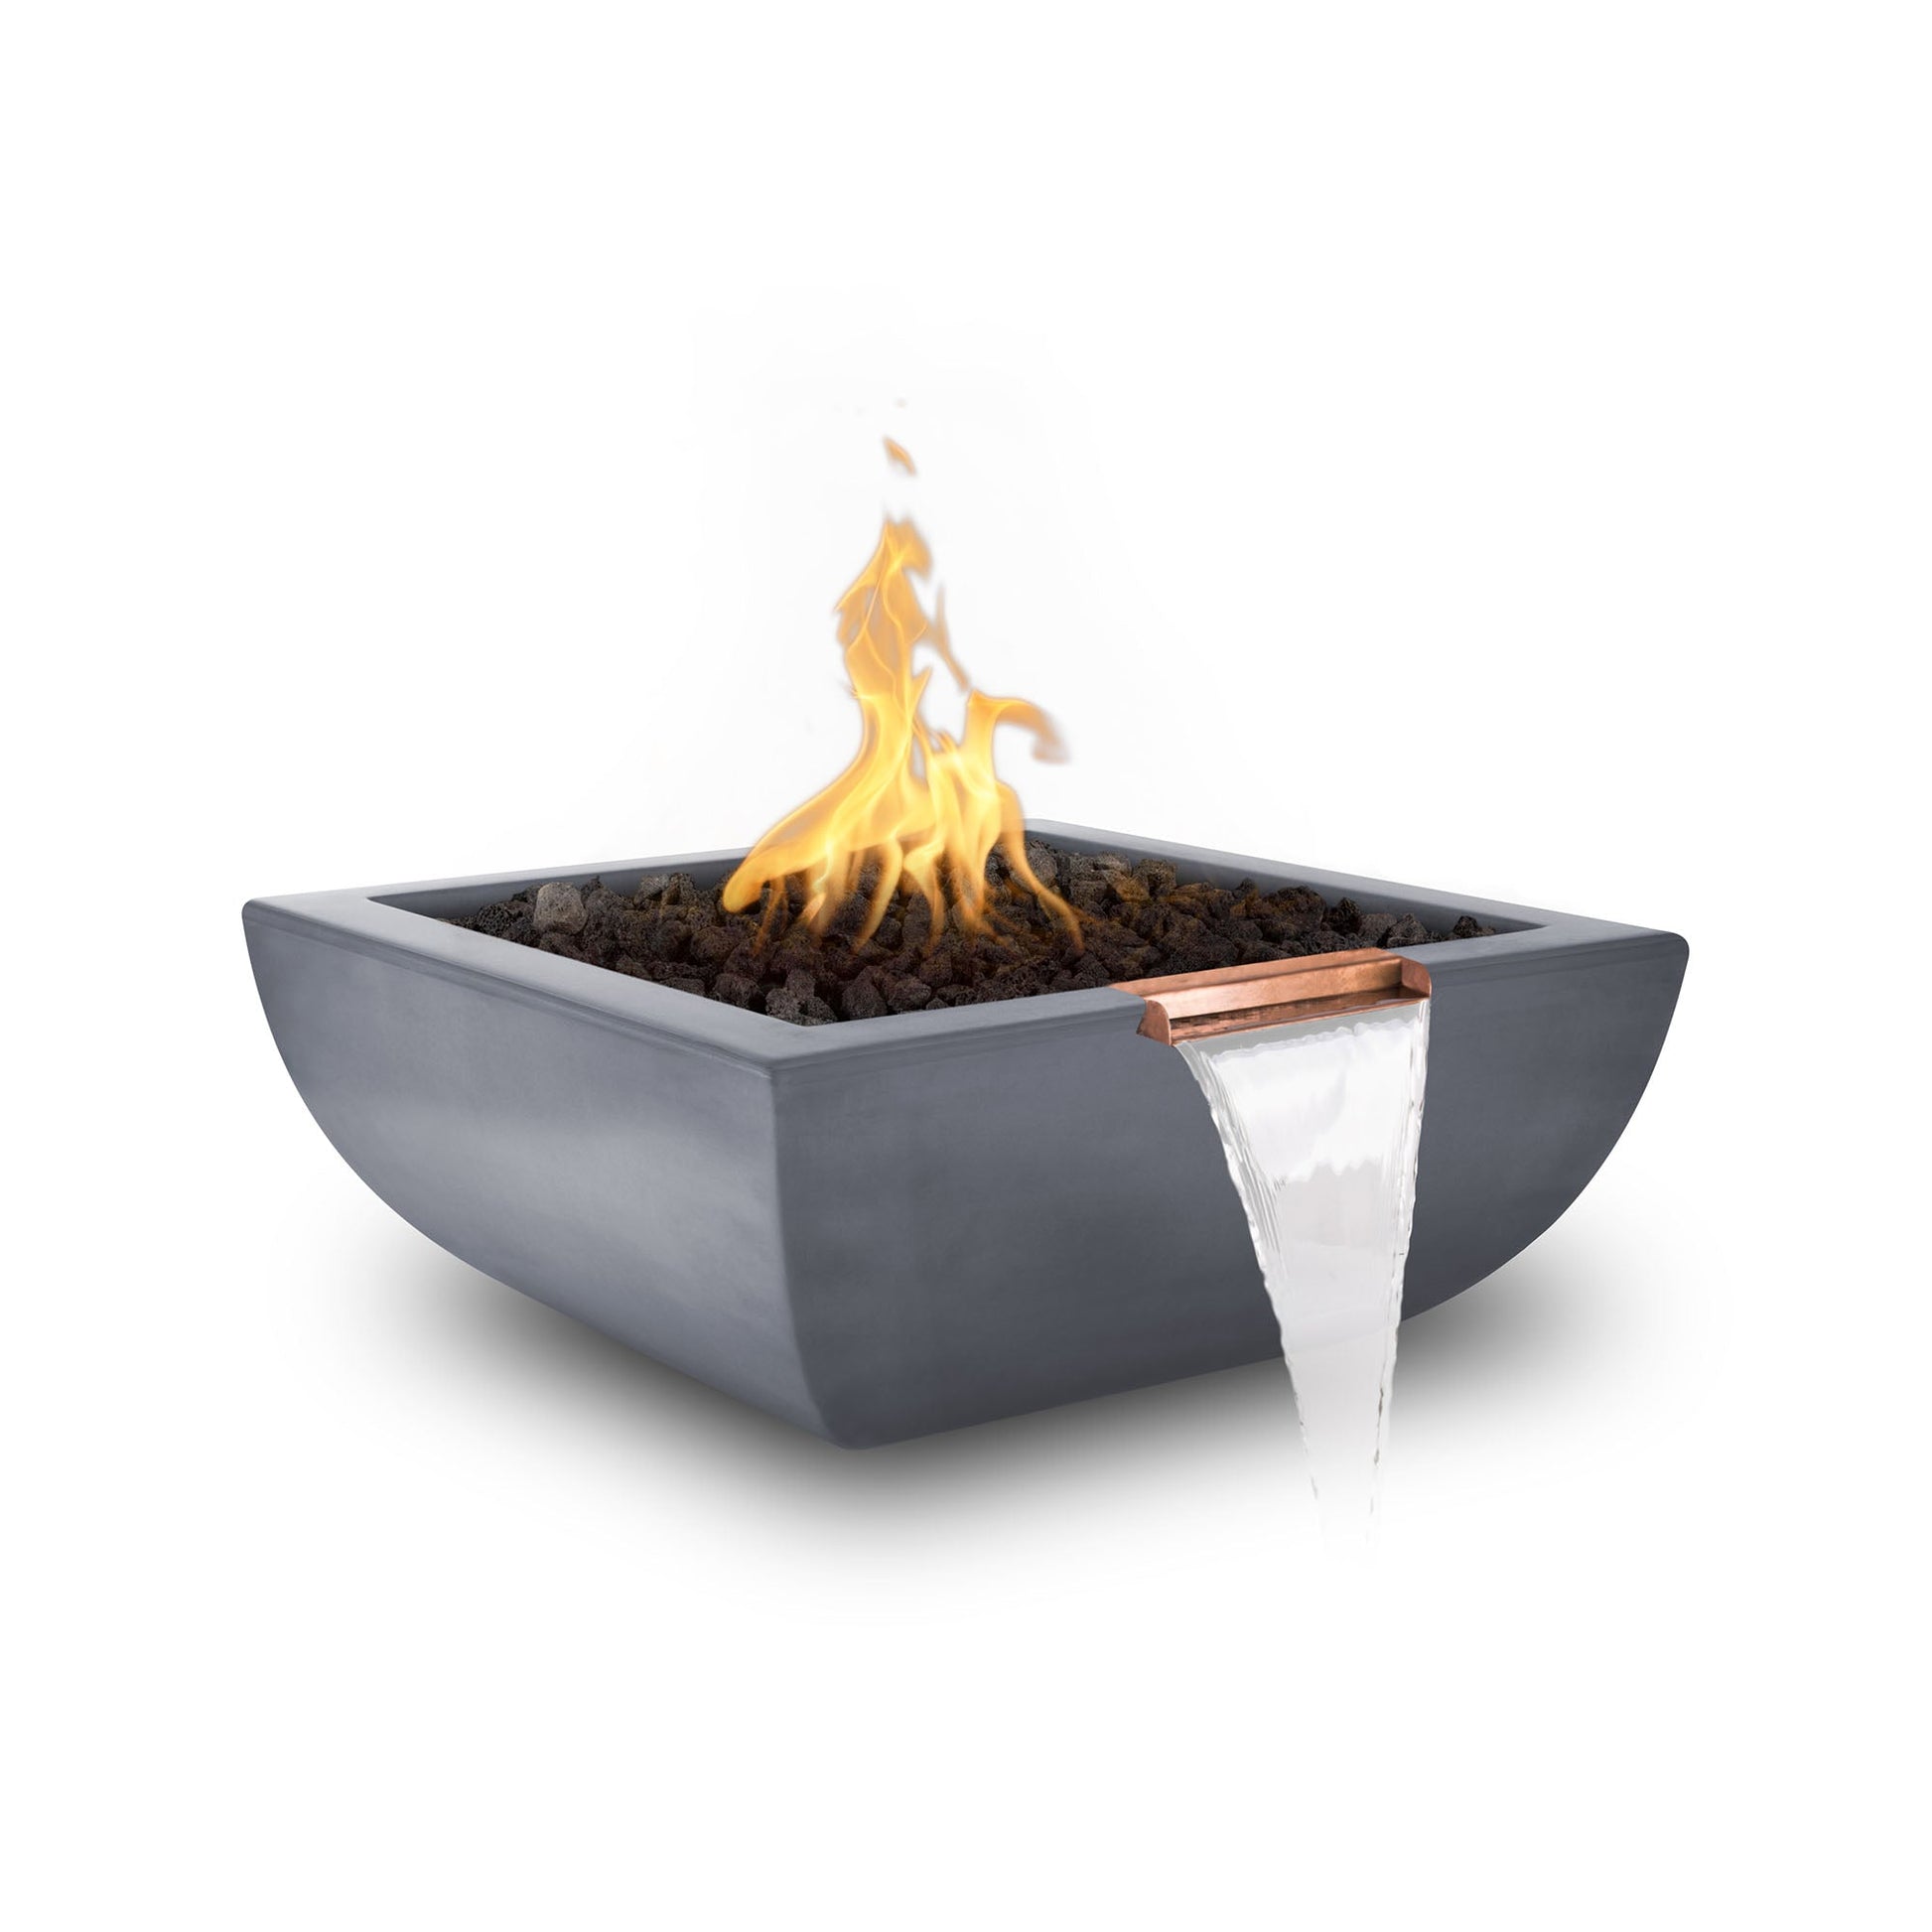 The Outdoor Plus Square Avalon 36" Rustic Gray GFRC Concrete Liquid Propane Fire & Water Bowl with Match Lit with Flame Sense Ignition